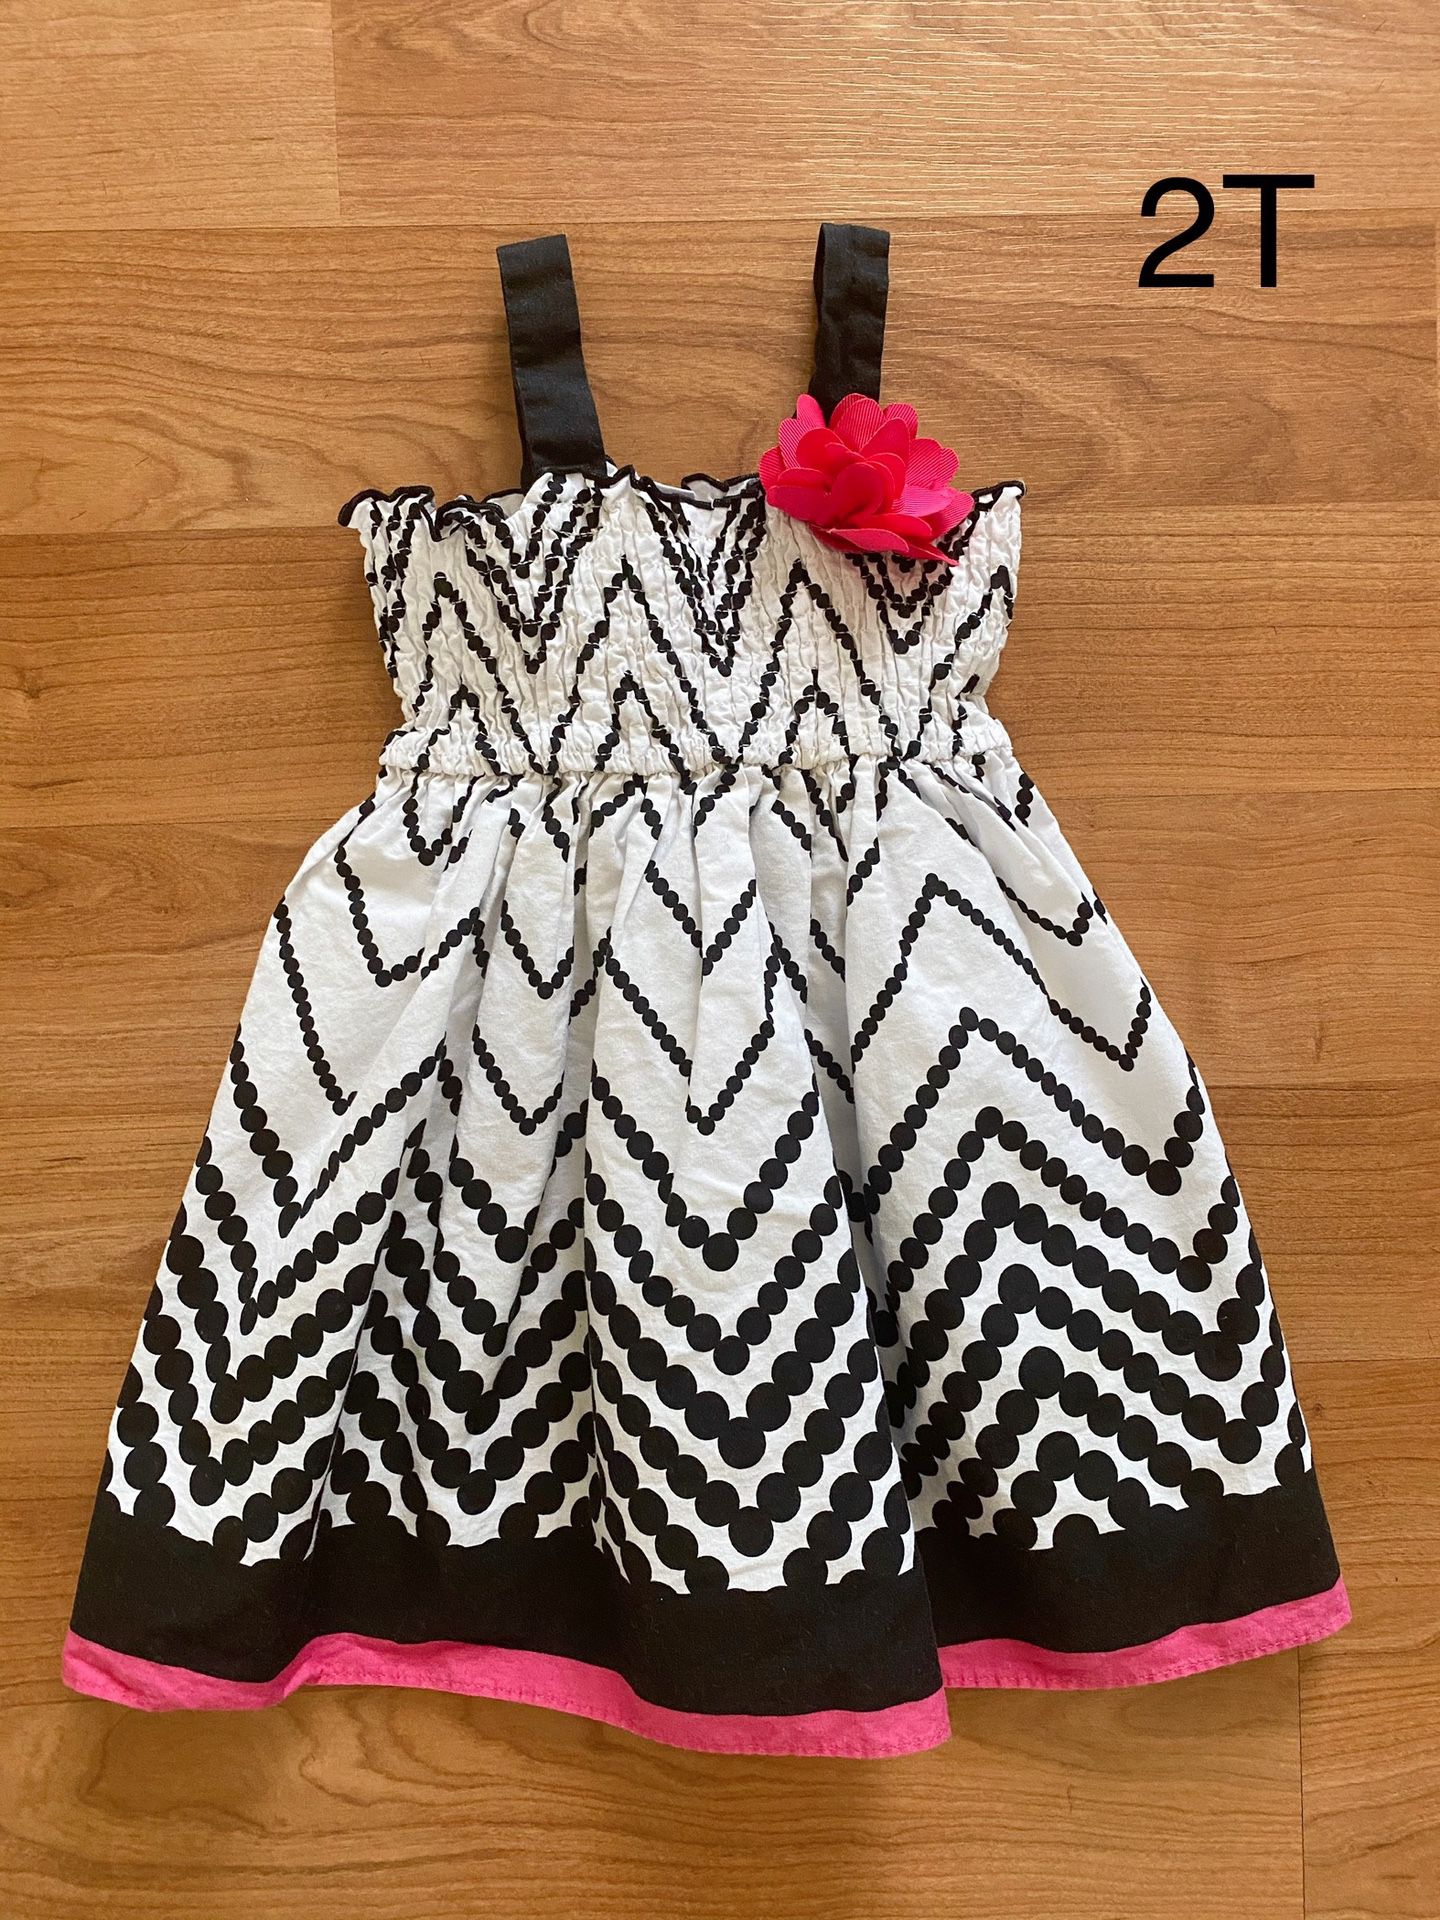 Girls summer dress, size 2T, great condition, kids clothes